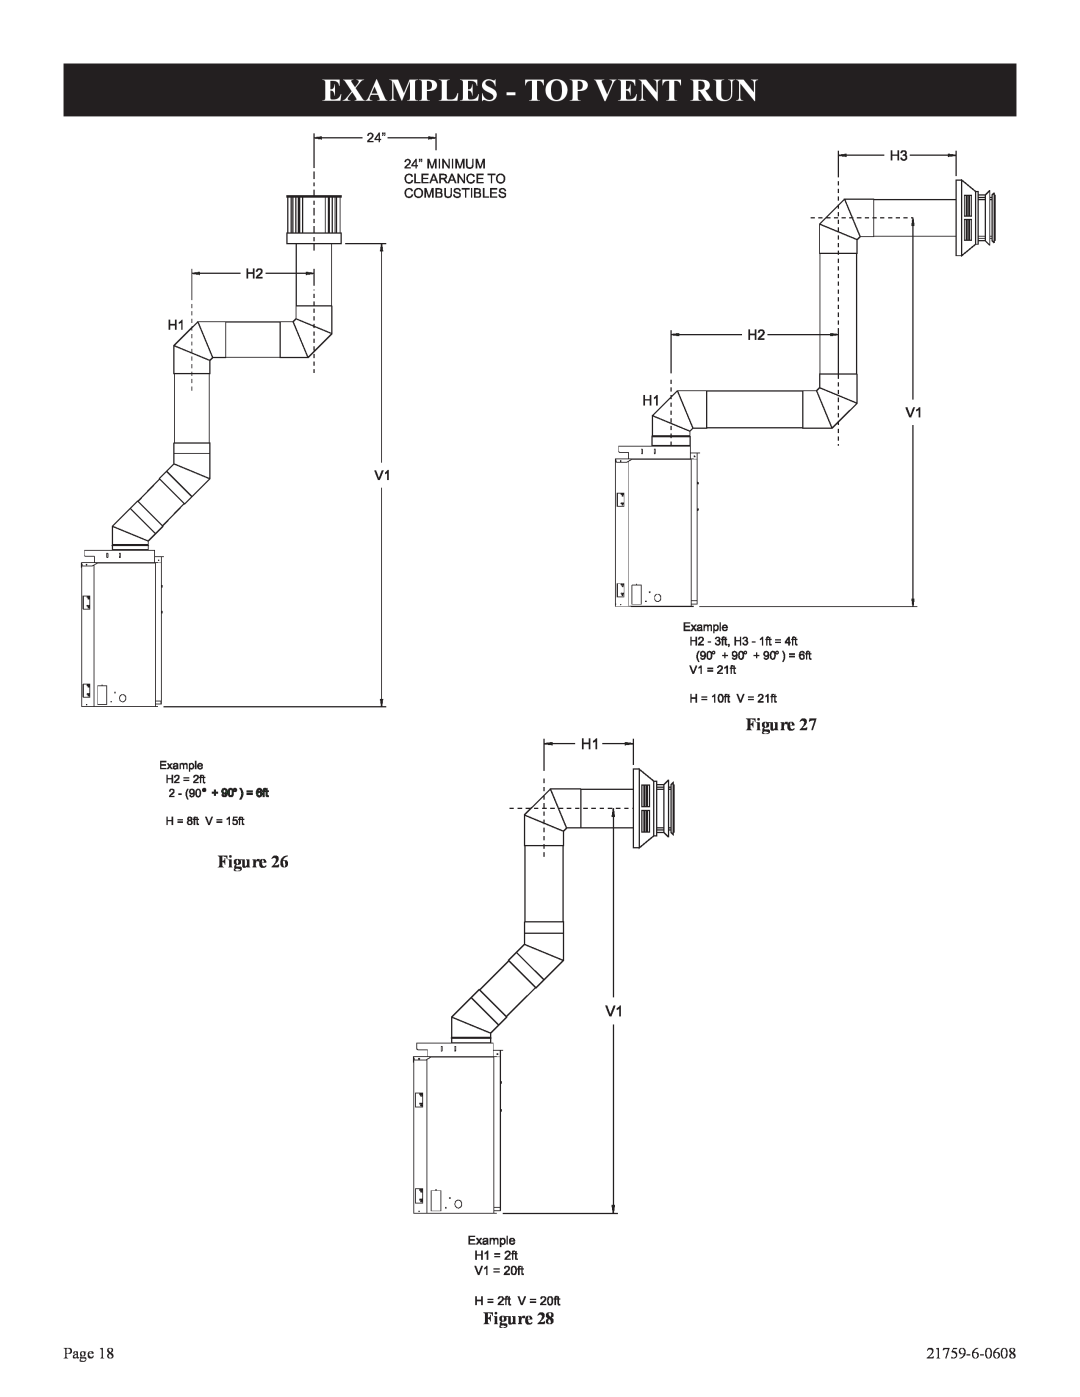 Empire Comfort Systems P)-2, DVP42FP Examples - Top Vent Run, Figure Figure Figure, Page, 21759-6-0608 